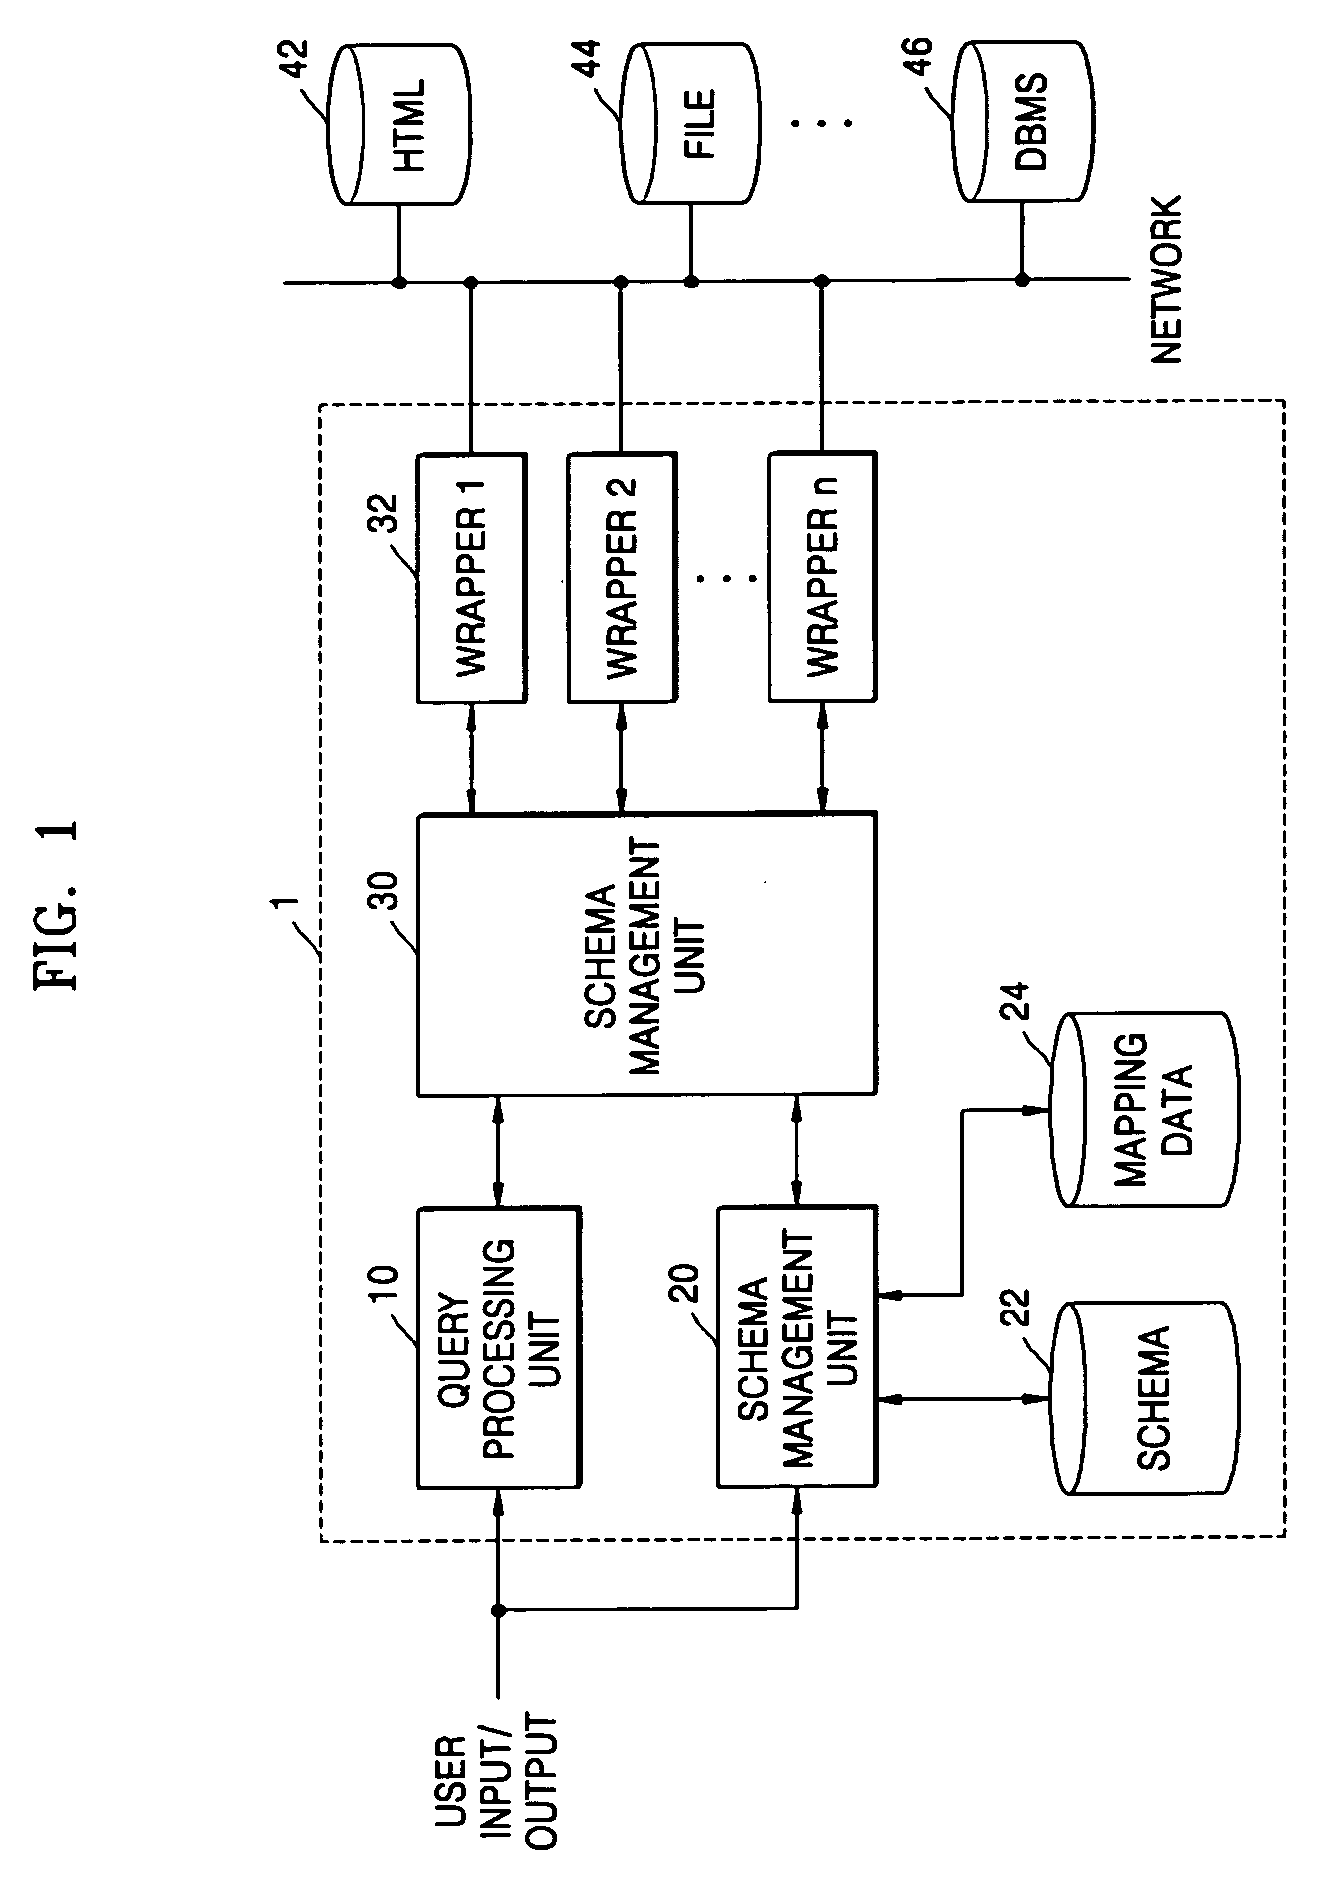 Method of generating database schema to provide integrated view of dispersed data and data integrating system